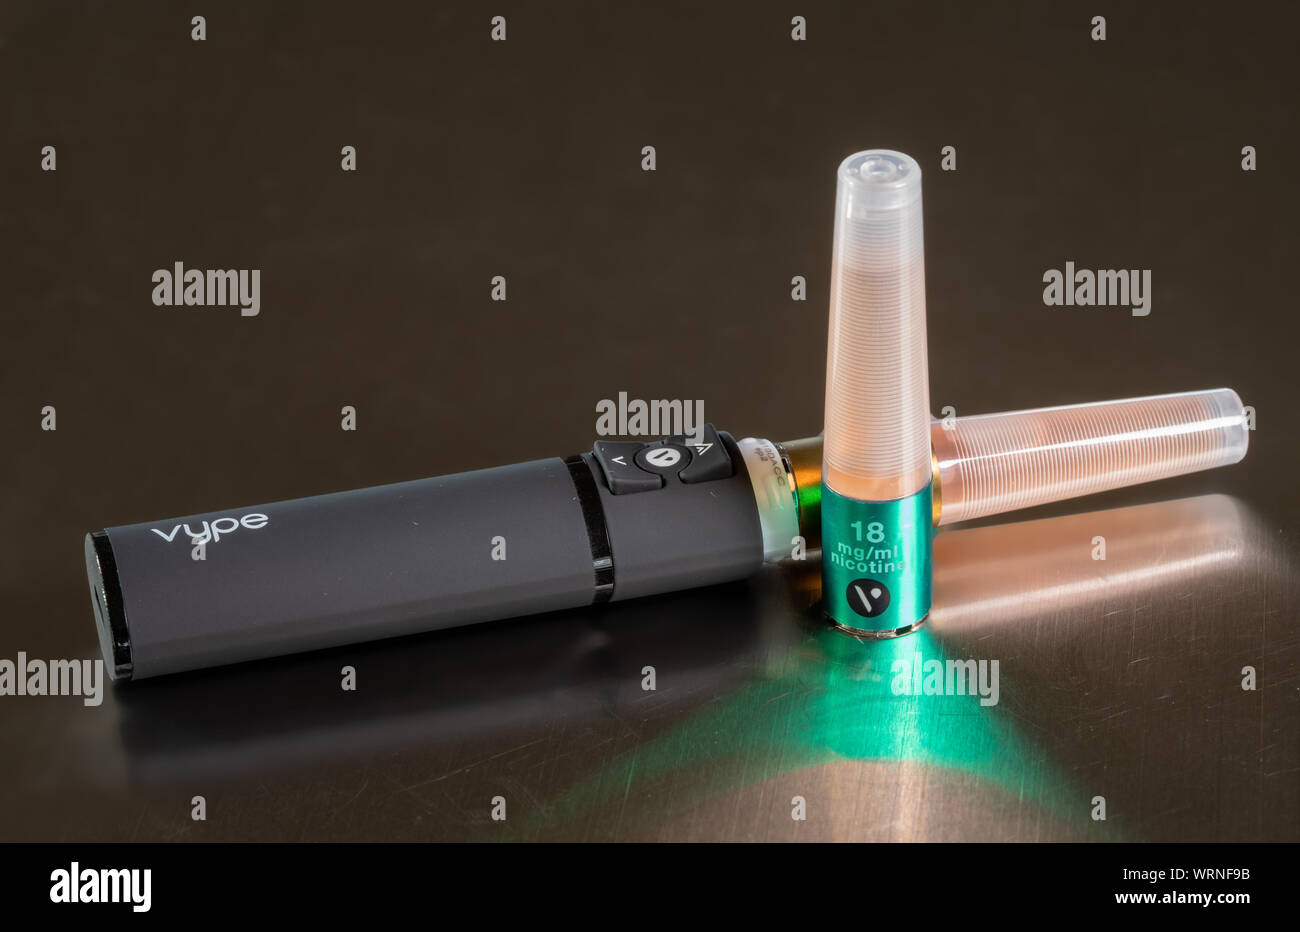 Vype vaping e-cigarette with charger and nicotine pod Stock Photo